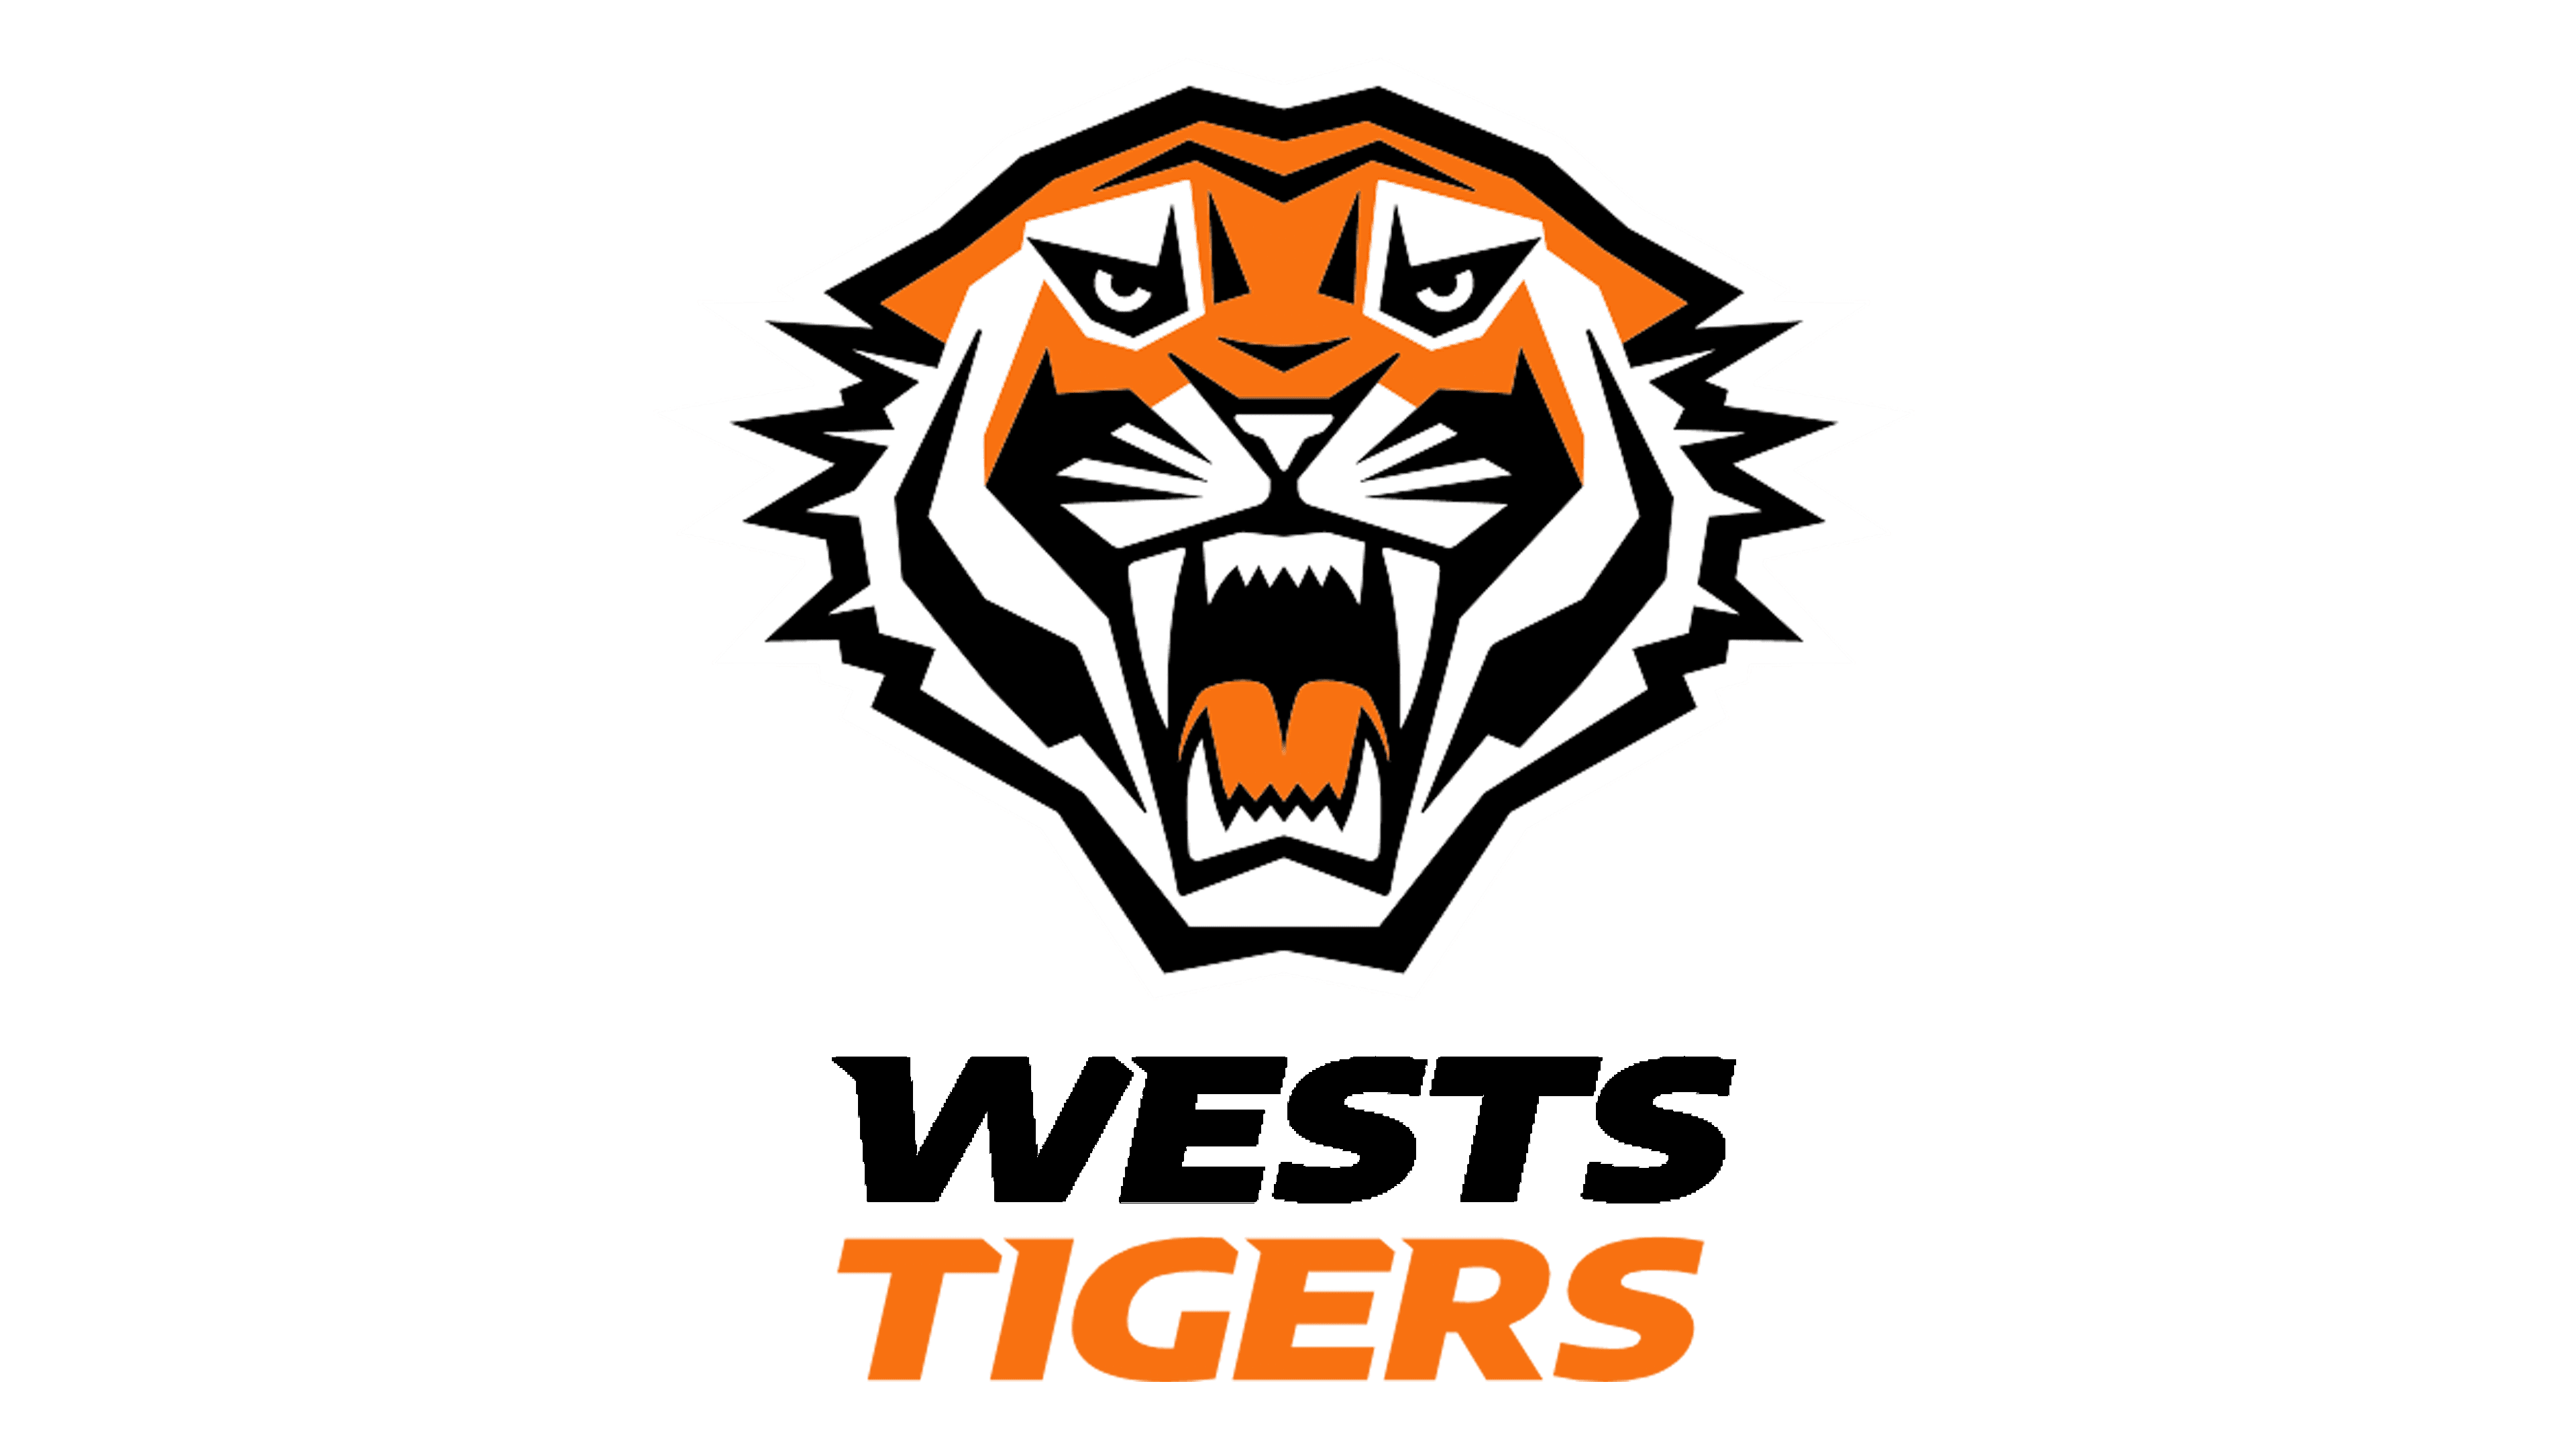 My Rugby League team the Wests Tigers.